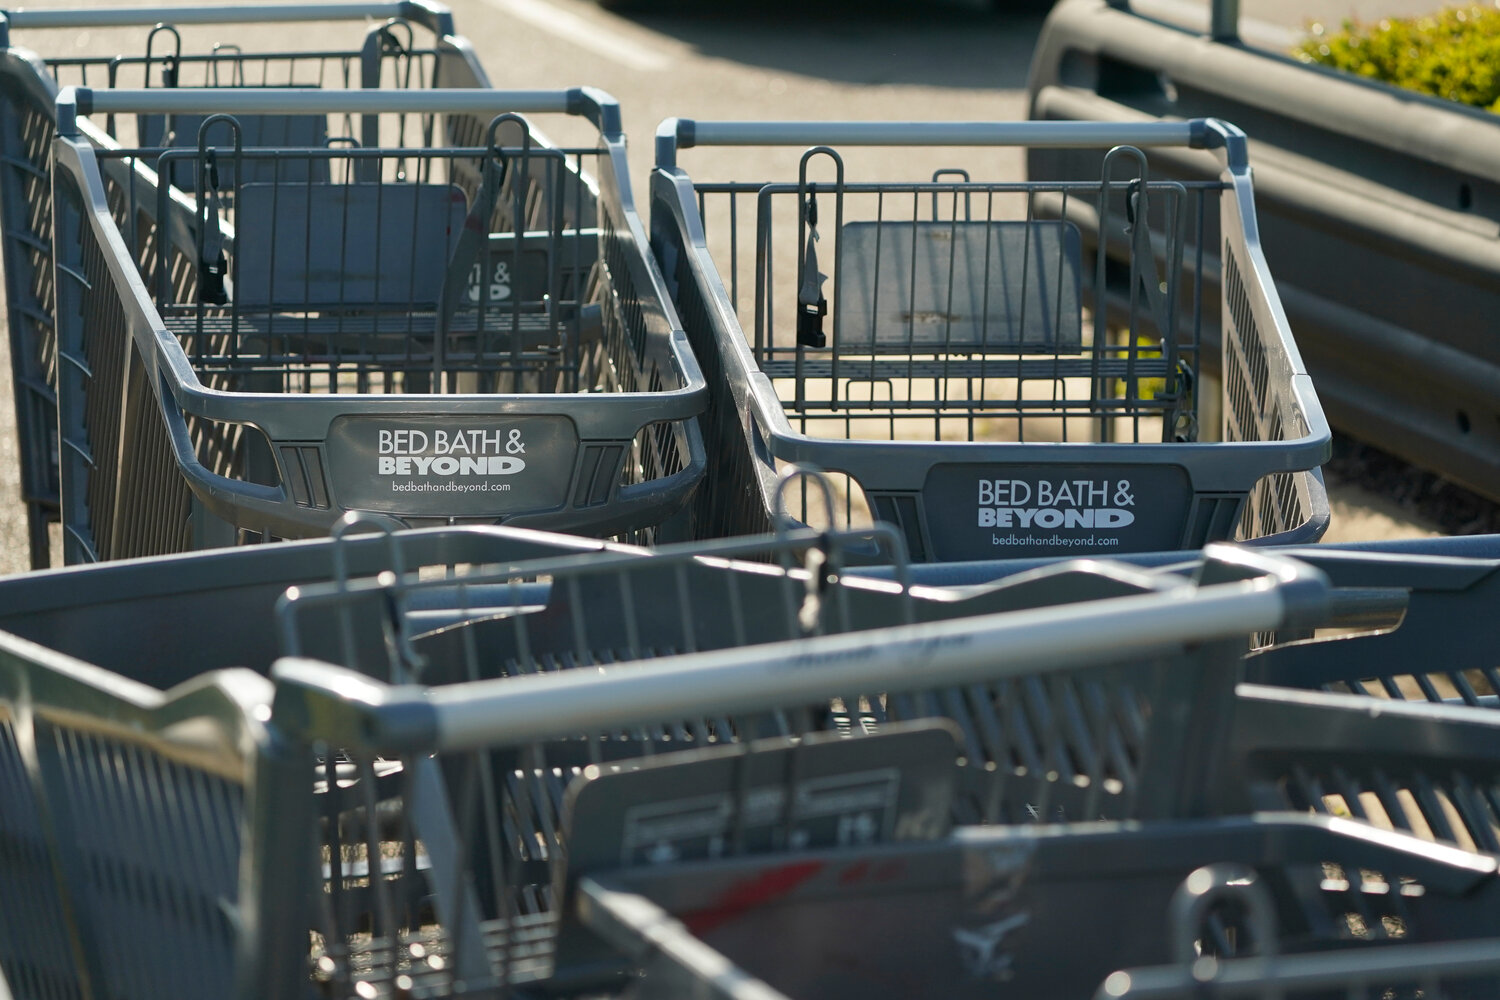 Bed Bath & Beyond shopping carts are left in a corral in Flowood, Miss., on Monday, April 24, 2023. One of the original big box retailers, the company filed for bankruptcy protection on Sunday, April 23, following years of dismal sales and losses. (AP Photo/Rogelio V. Solis)